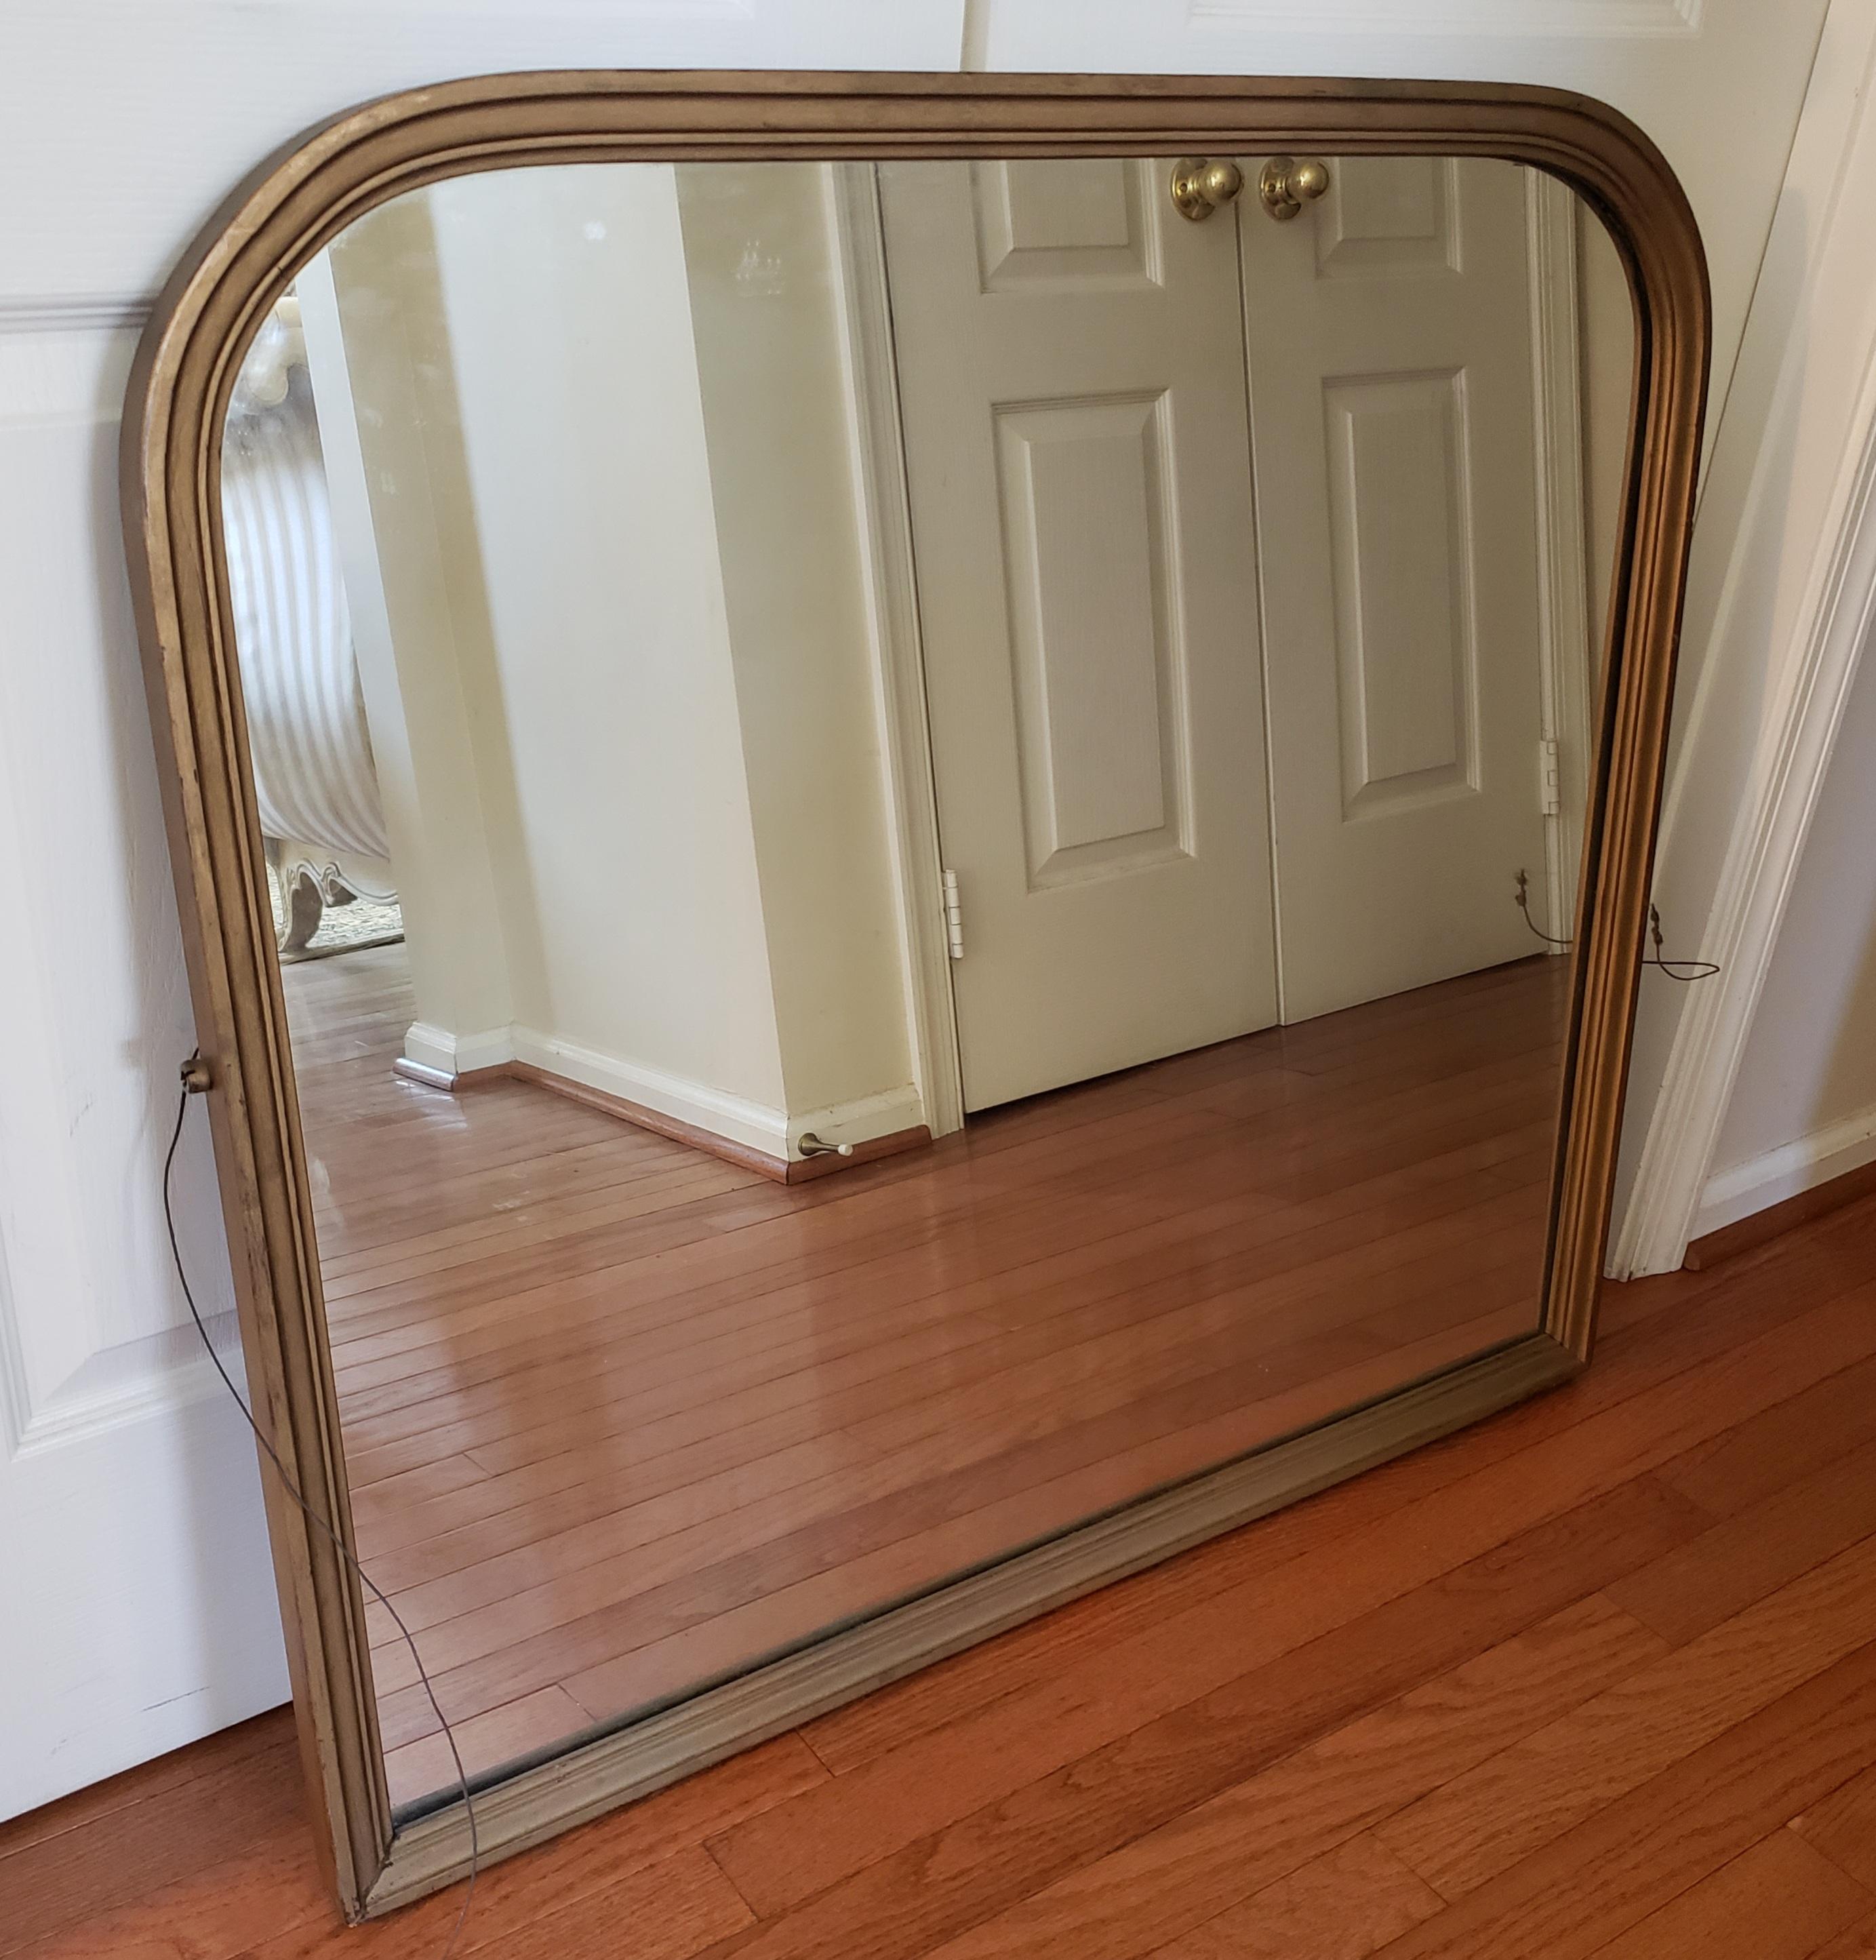 A rare original W. B. & Sons Louis Phillipe style mirror. W.B. Moses moved to Washington from Philadelphia during the Civil War, and within 50 years established the largest exclusively retail furniture, carpet, and drapery business in America. W.B.